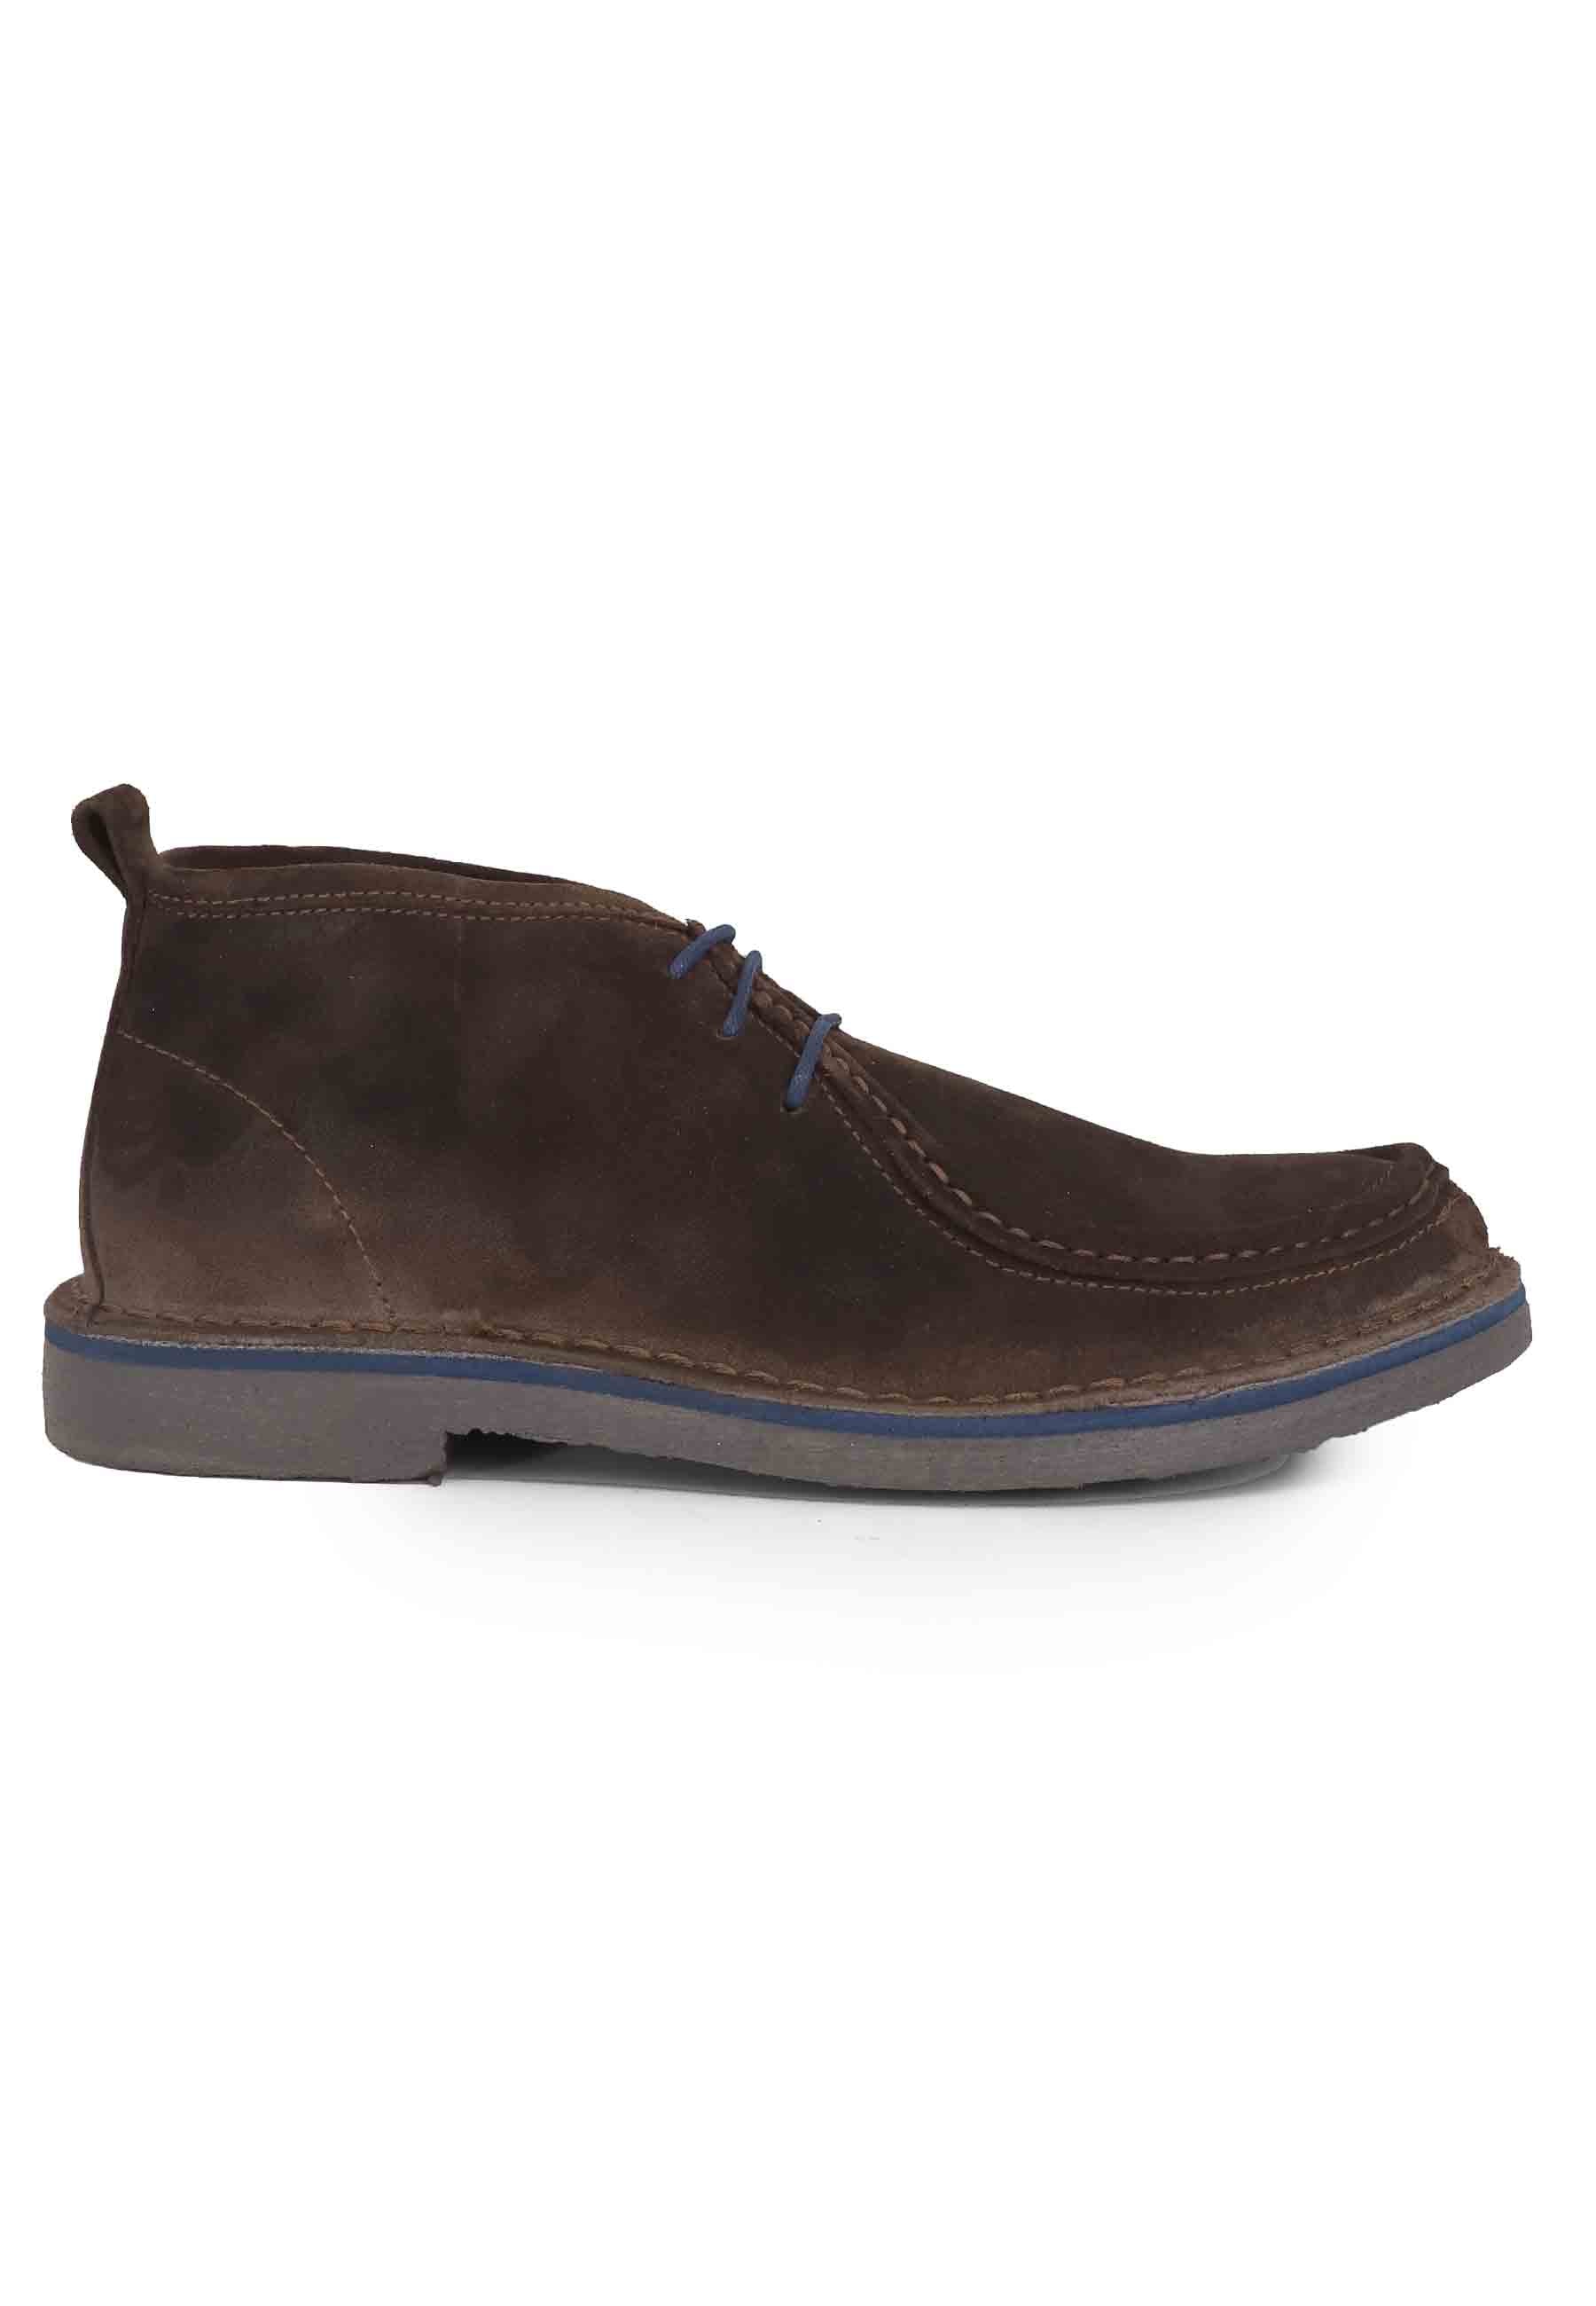 Men's lace-up ankle boots in dark brown suede with rubber sole